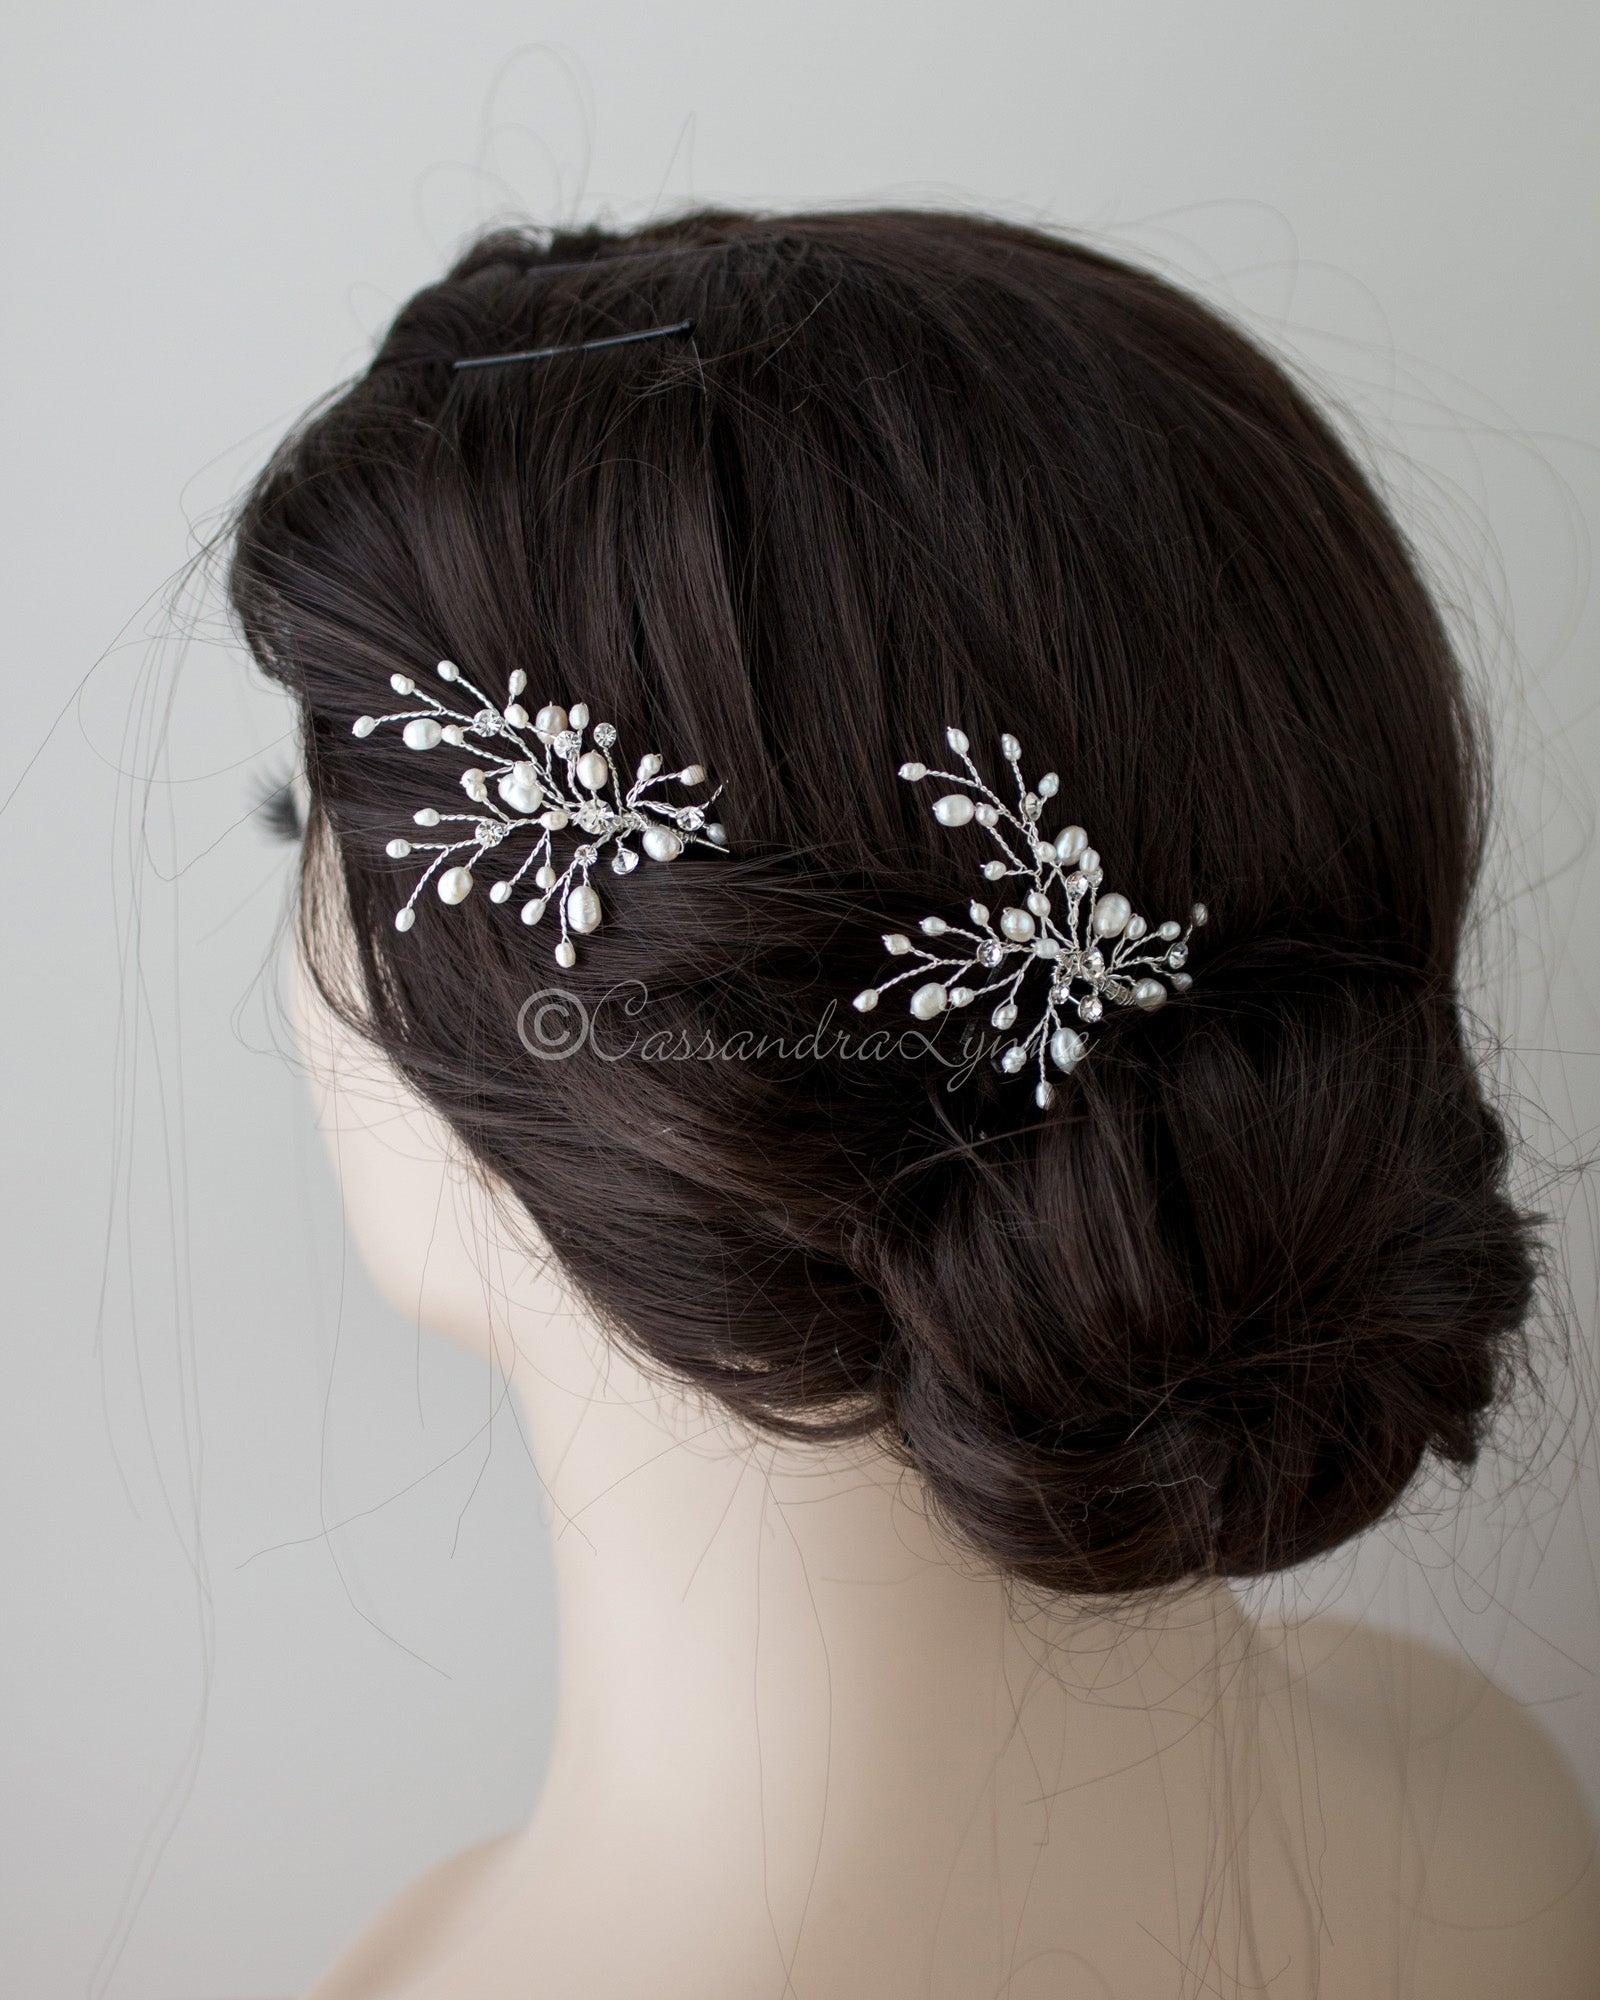 Ivory Pearl and Crystal Bridal Hair Pin - Cassandra Lynne